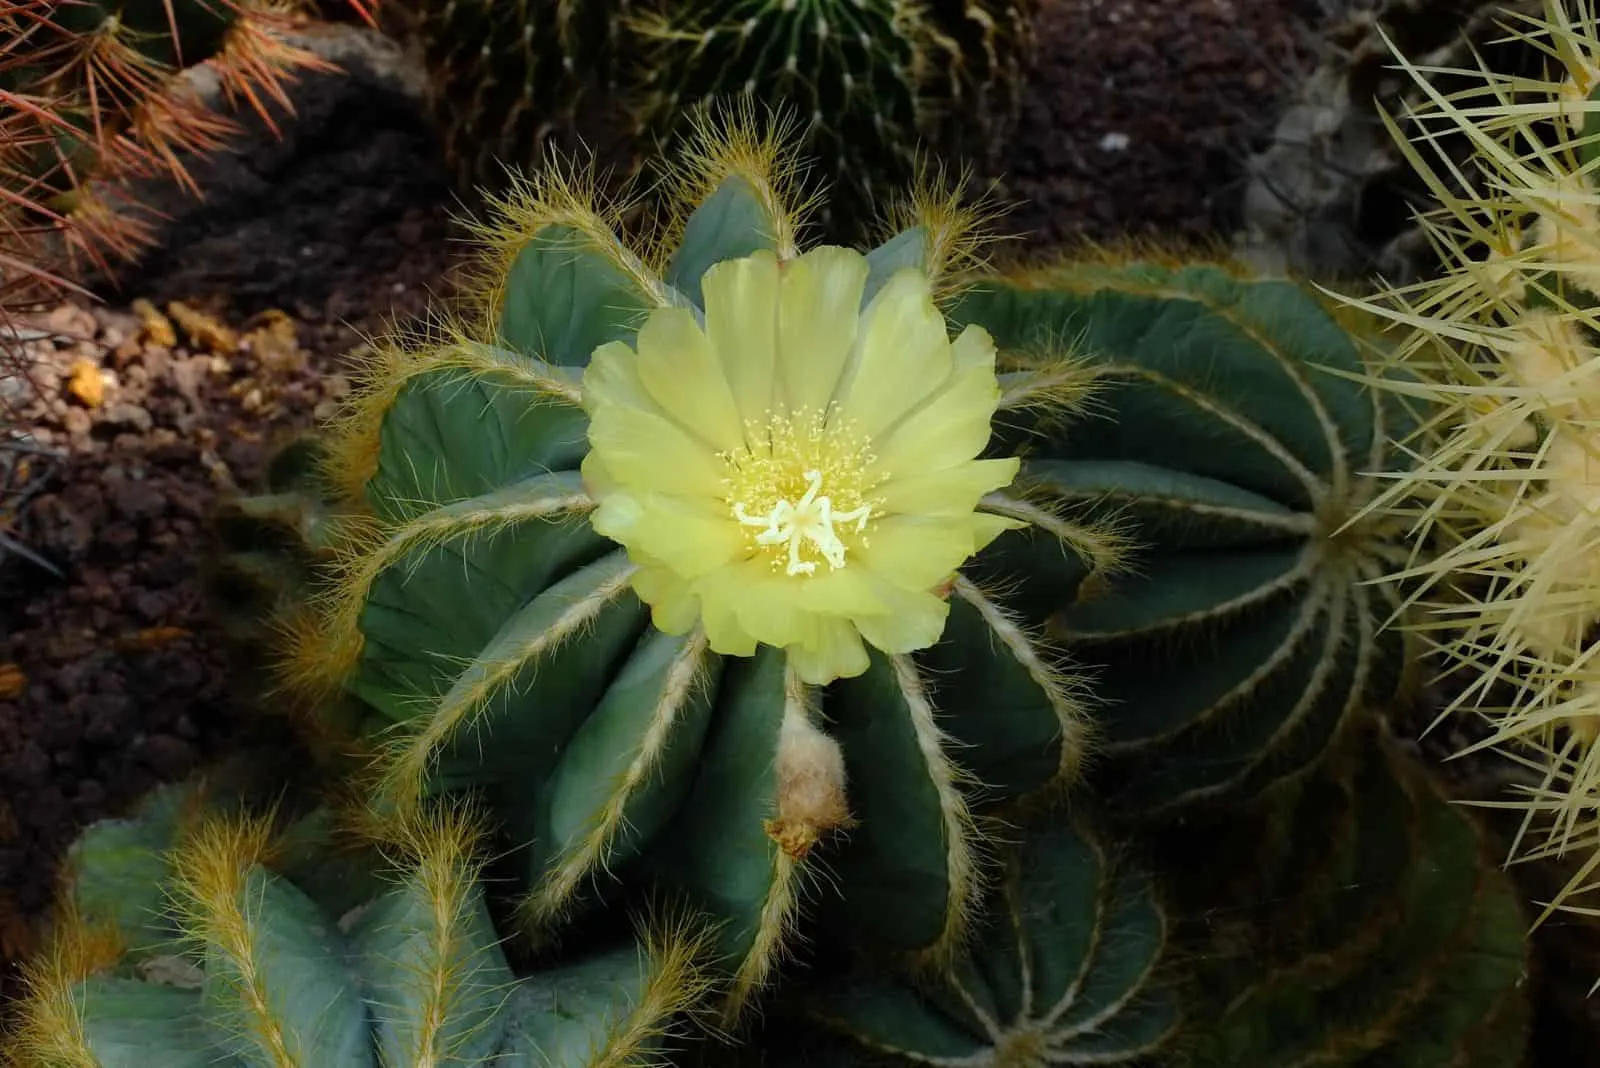 Parodia Magnifica with yellow flower